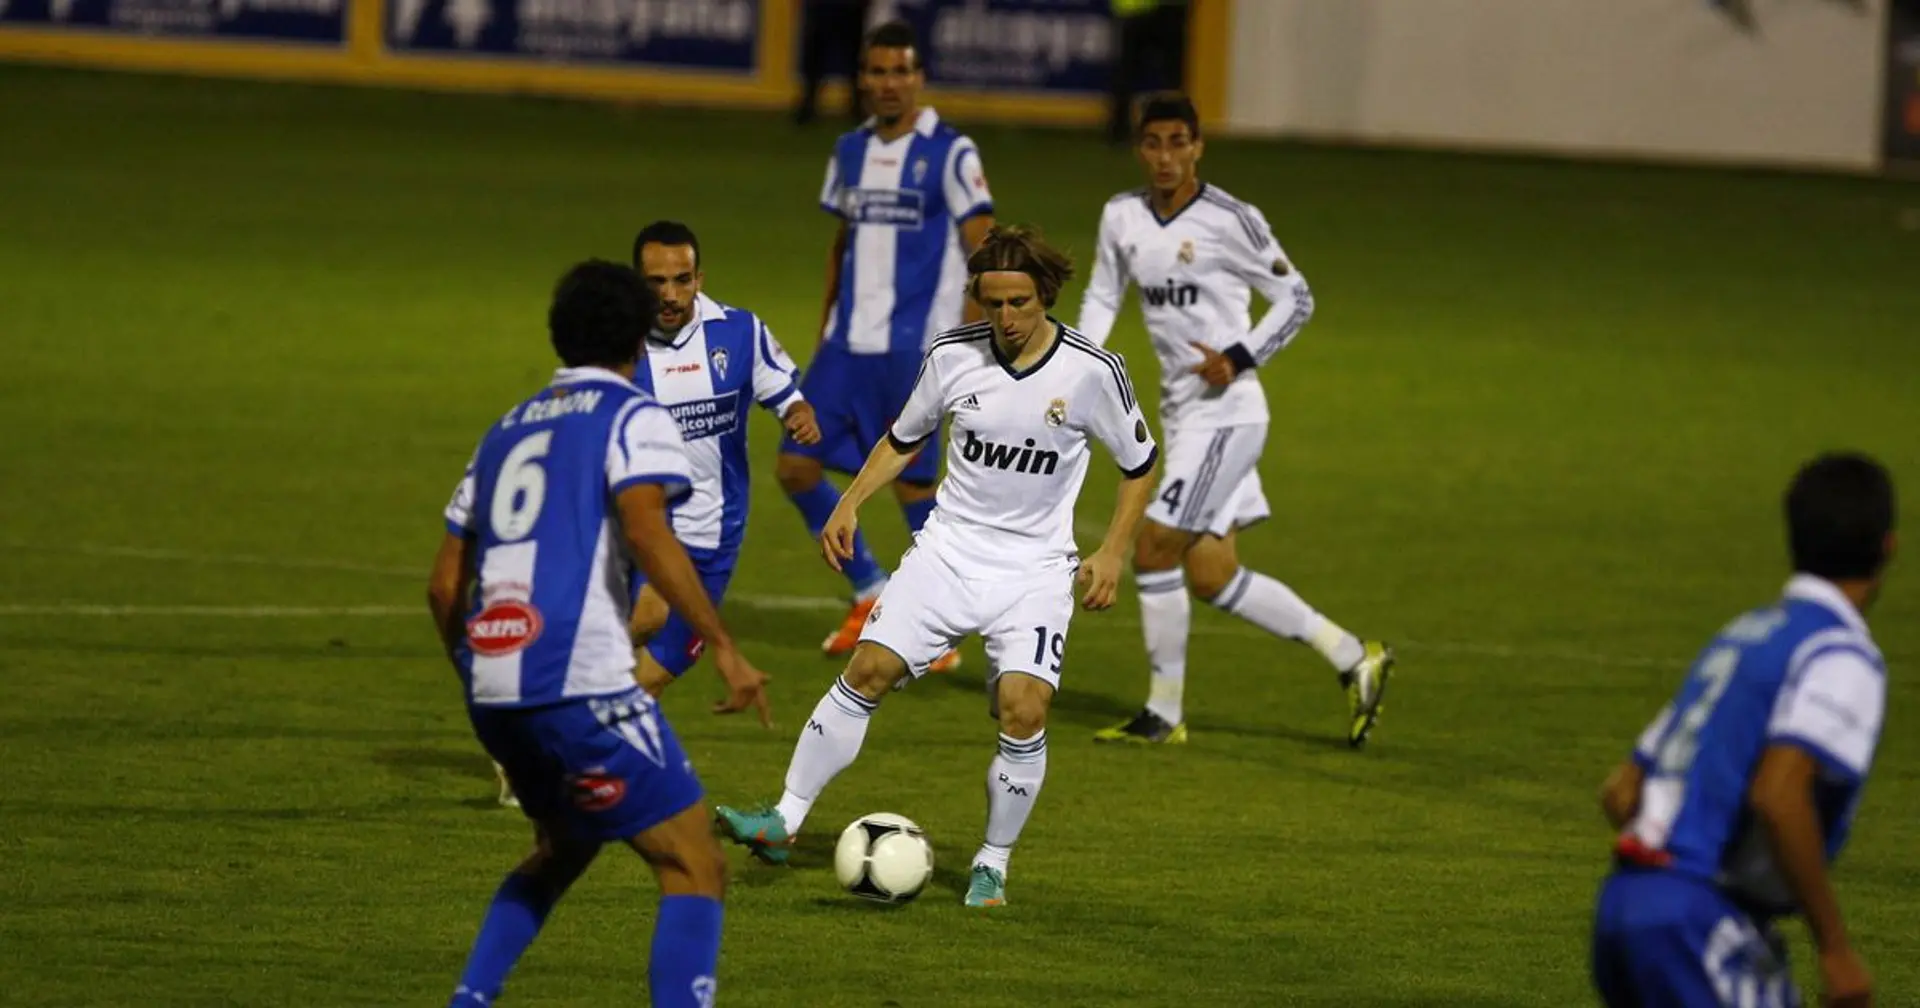 Real Madrid met upcoming rivals Alcoyano only twice in Copa del Rey: here's how the clashes ended